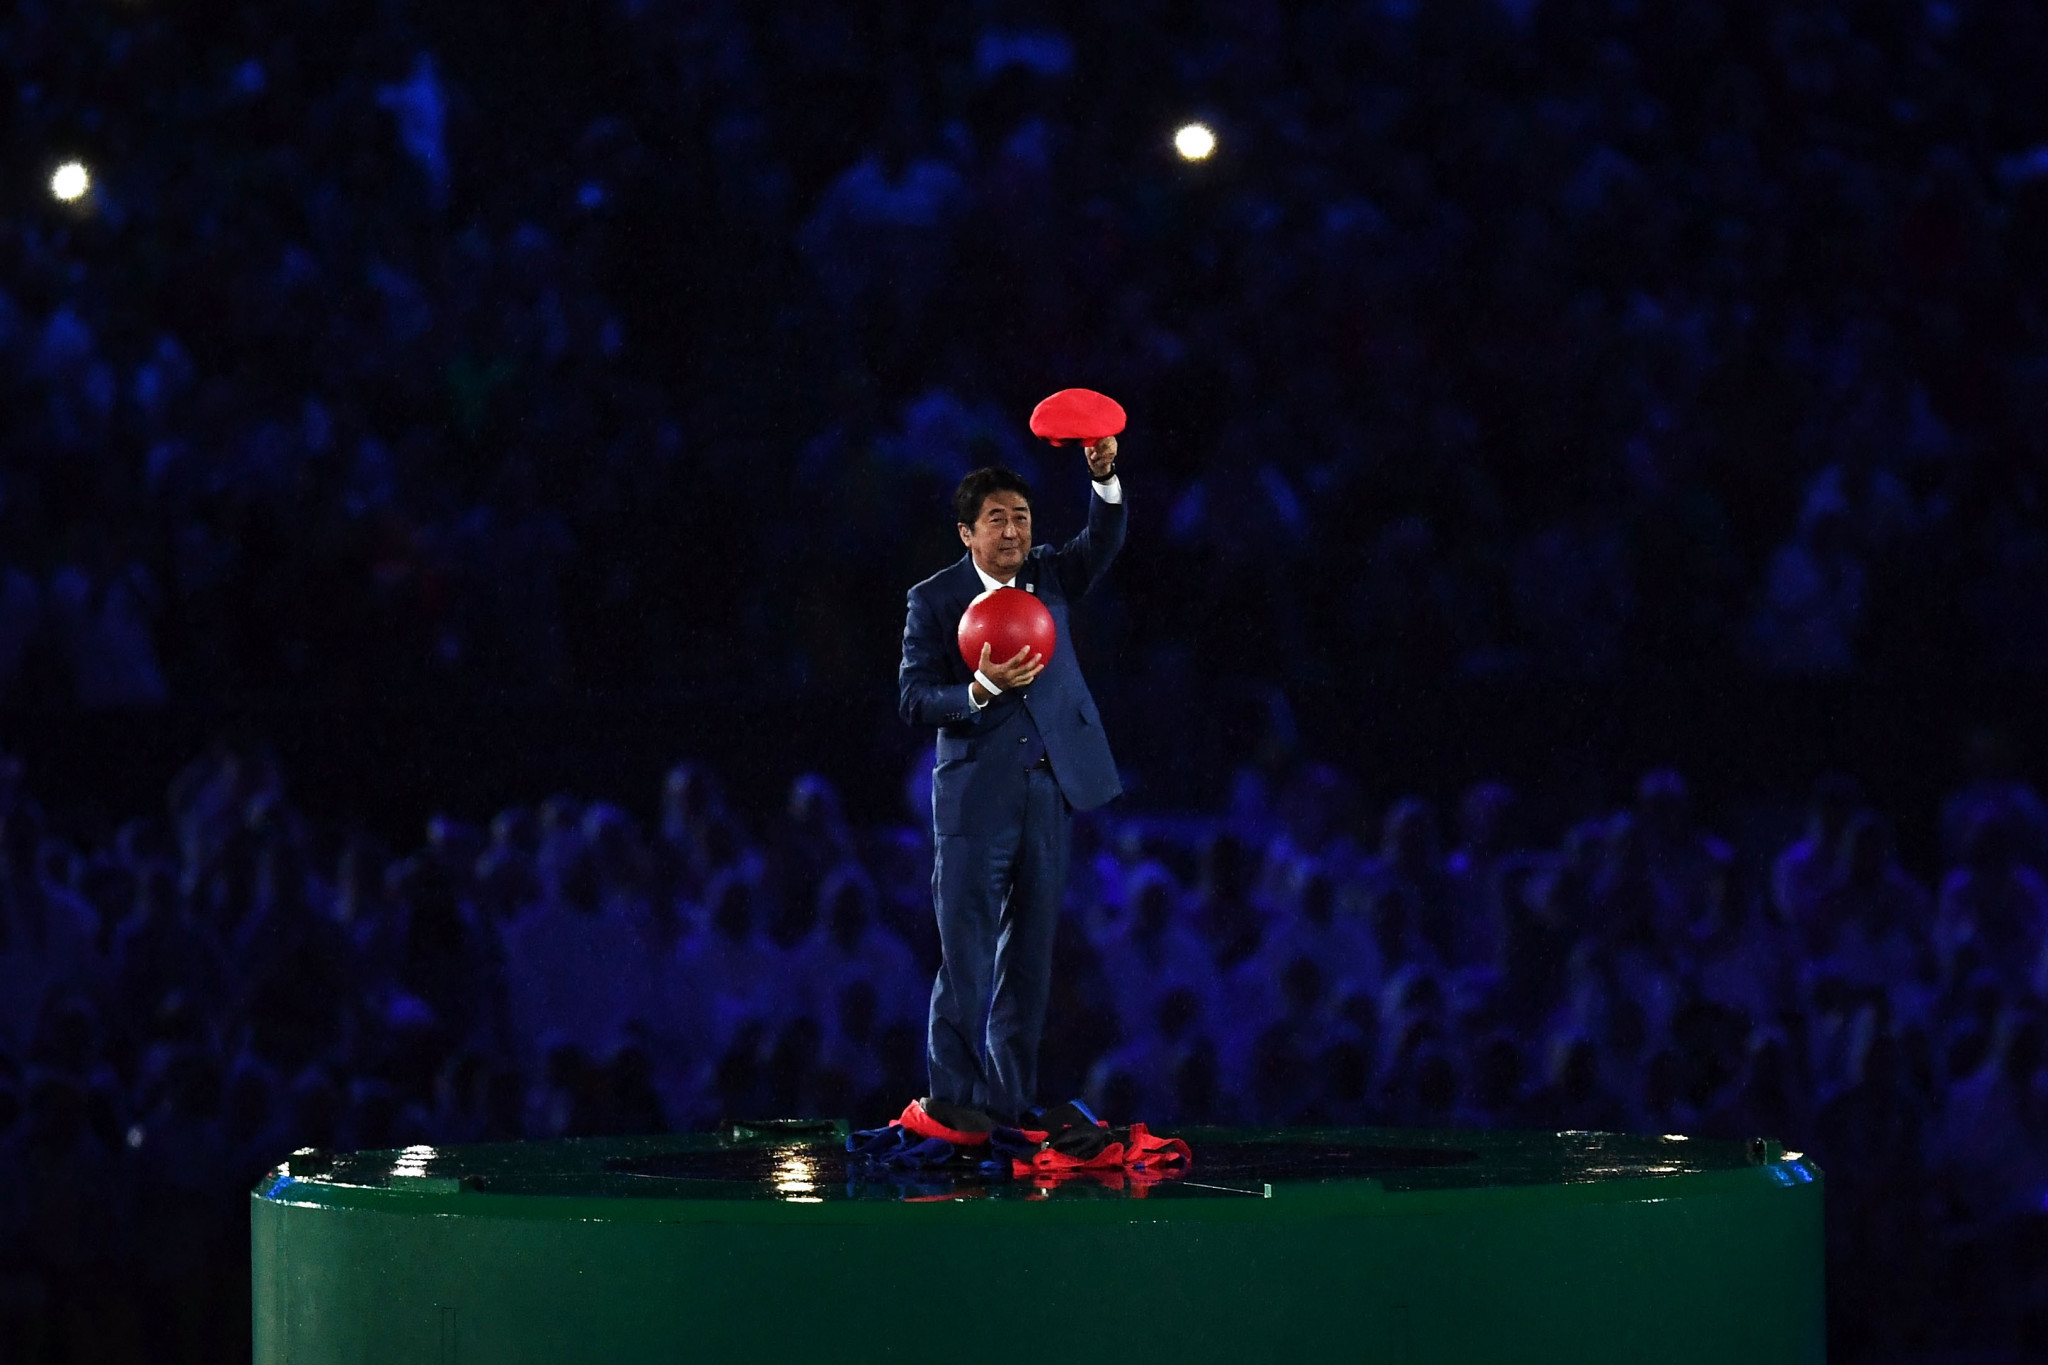 Shinzō Abe memorably appeared dressed as Super Mario in the Closing Ceremony of Rio 2016 ©Getty Images